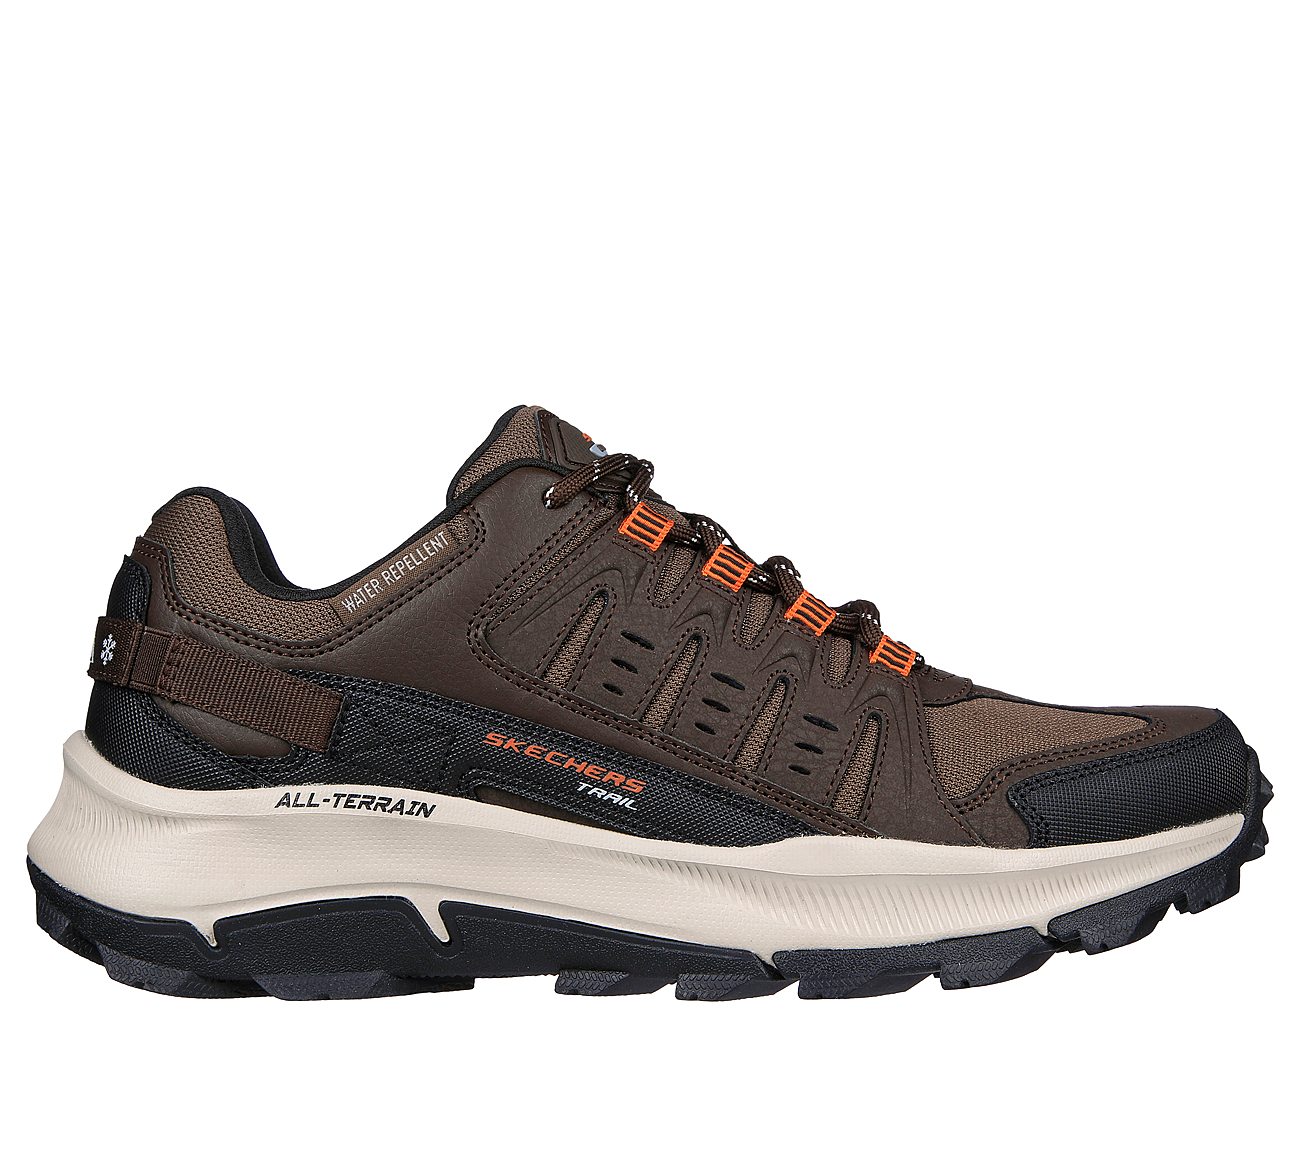 EQUALIZER 5.0 TRAIL - SOLIX, BROWN/ORANGE Footwear Lateral View